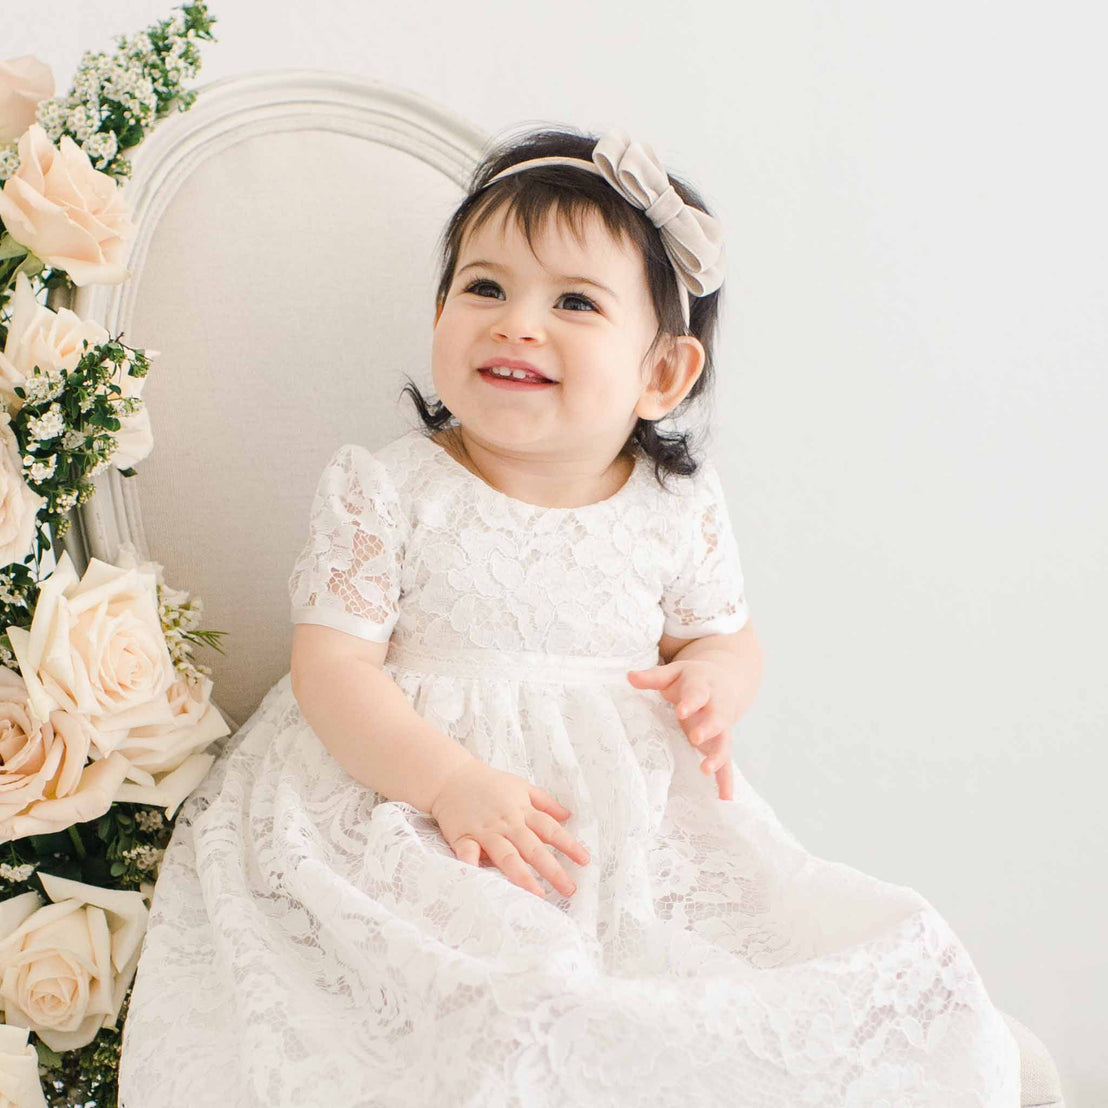 A joyful toddler wearing a traditional white lace dress sits beside a chair adorned with pink roses, smiling brightly in a vintage, airy room while wearing the Rose Velvet Bow Headband.